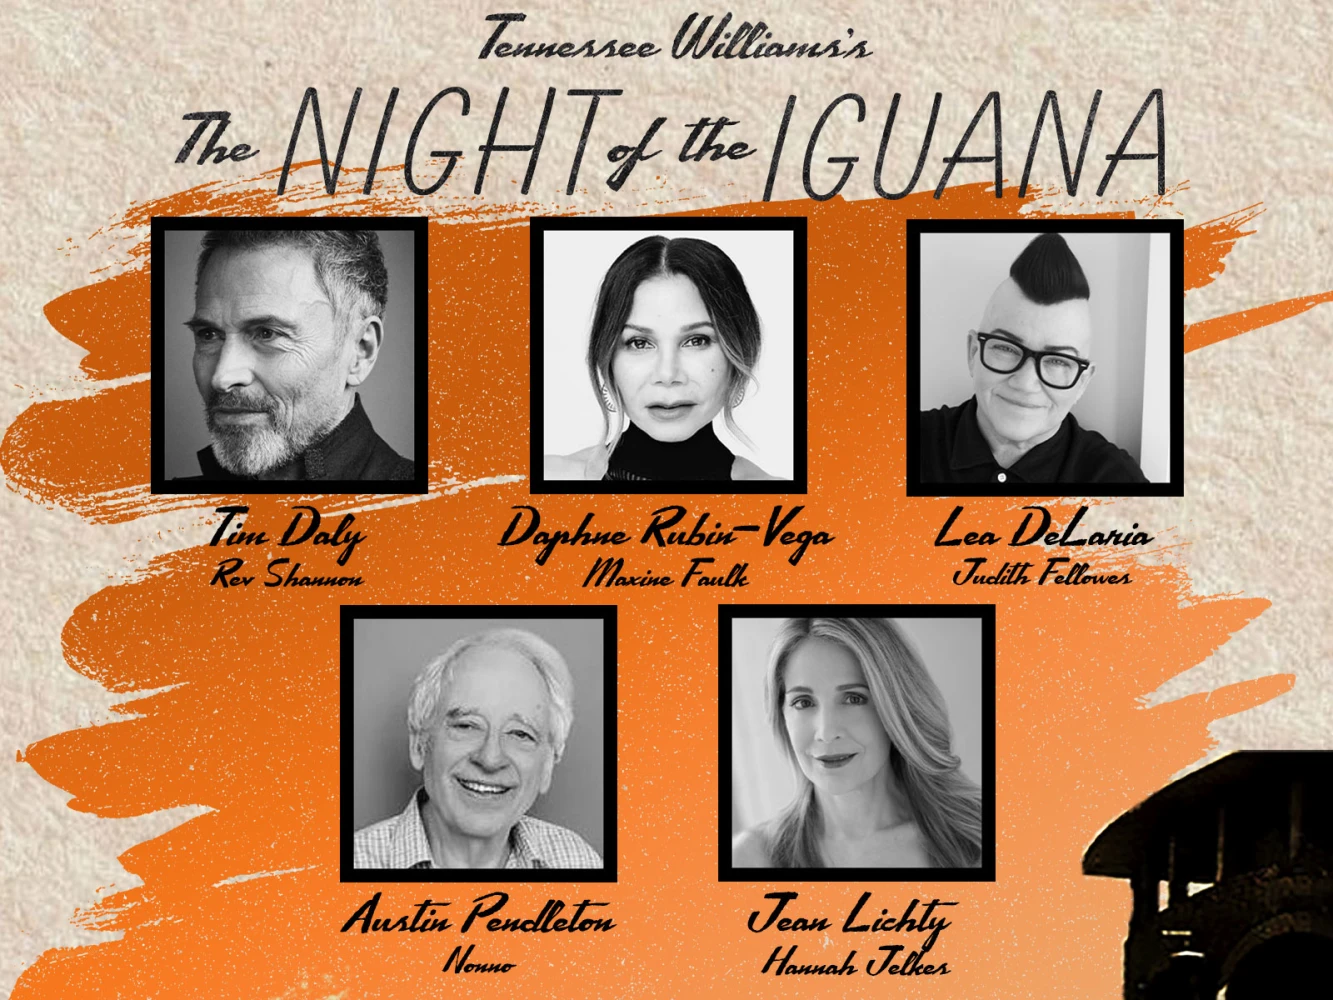 Tennessee Williams's The Night of the Iguana: What to expect - 8